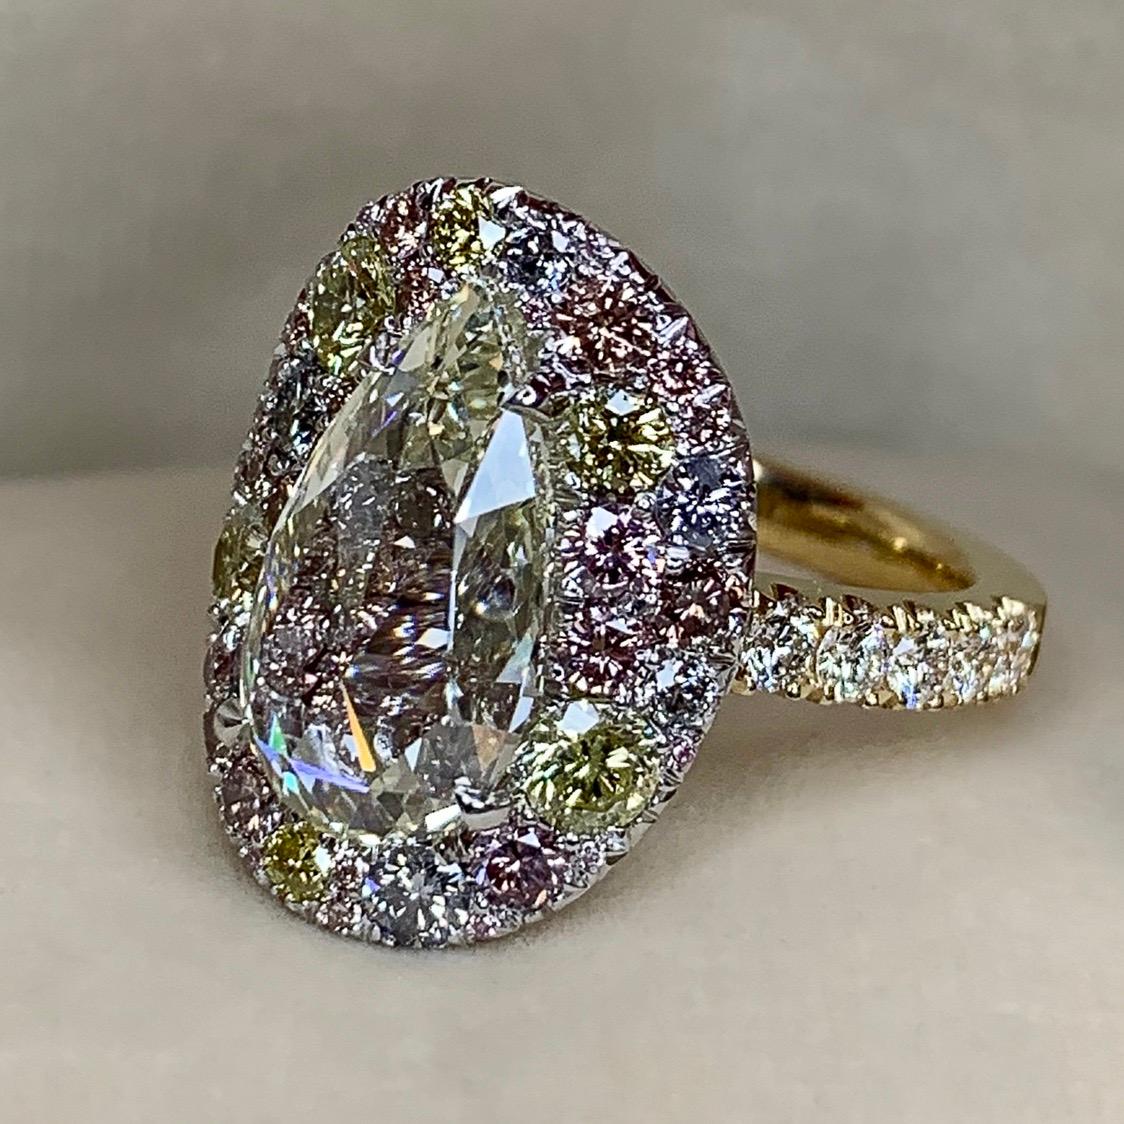 One of a kind ring in 18K White & yellow gold 13,2 g. Set with a 3,08 ct. rose-cut pear shape diamond centerstone, pave set Fancy Pink, blue & yellow brilliant-cut diamonds 1,545 ct.( continuous pave setting under the rose-cut diamond centerstone),